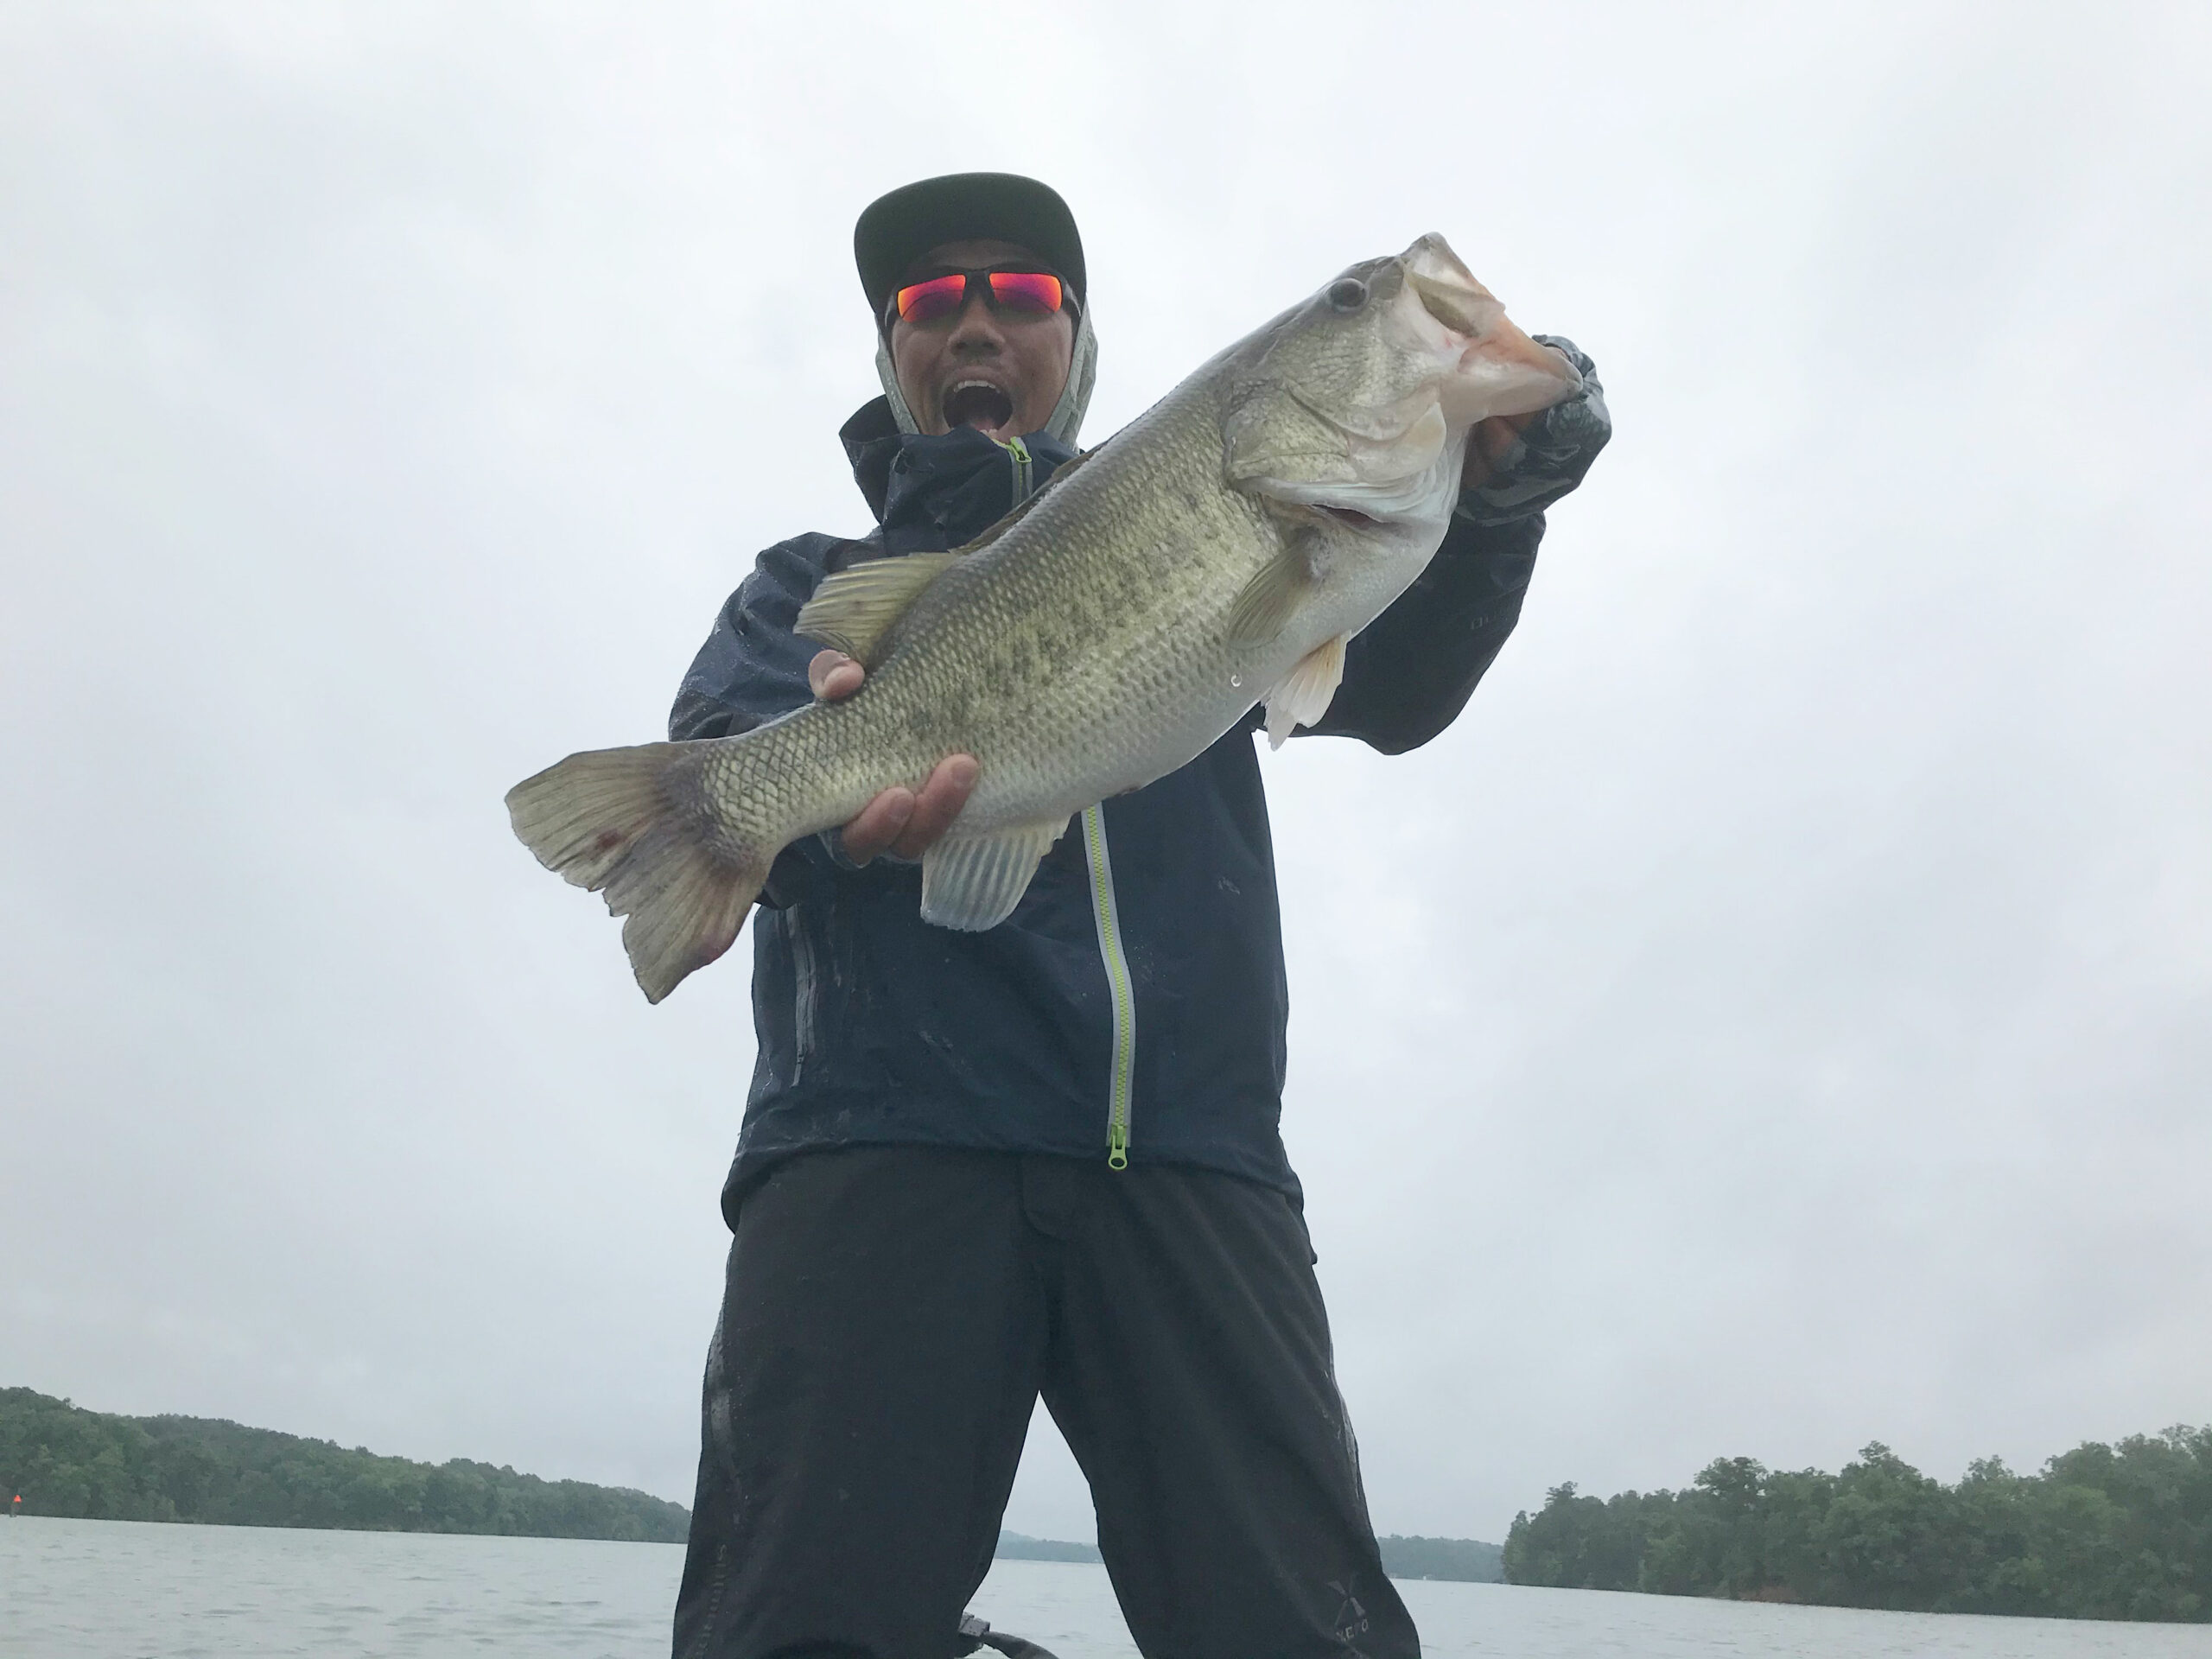 Fukae Wins Group B with 114-2; Jones Jr. Survives to Advance to Knockout  Round - Major League Fishing